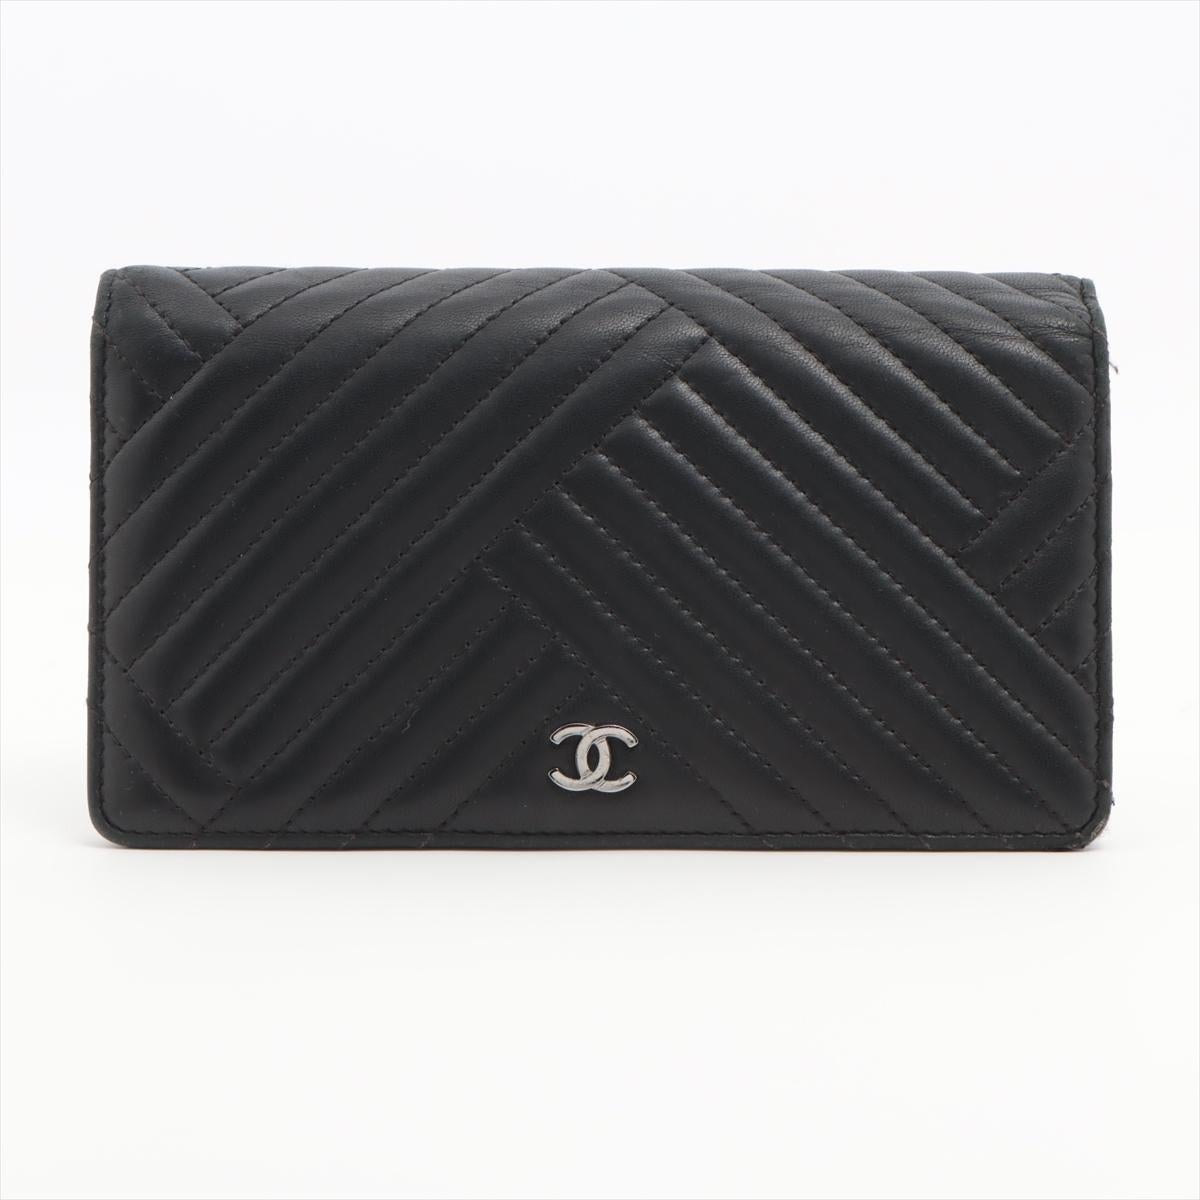 The Chanel V Stitch Lambskin Wallet in Black is an epitome of refined elegance and luxury. Crafted from sumptuous lambskin leather, the wallet features a meticulously stitched V-shaped pattern, adding a distinctive and tactile dimension to its